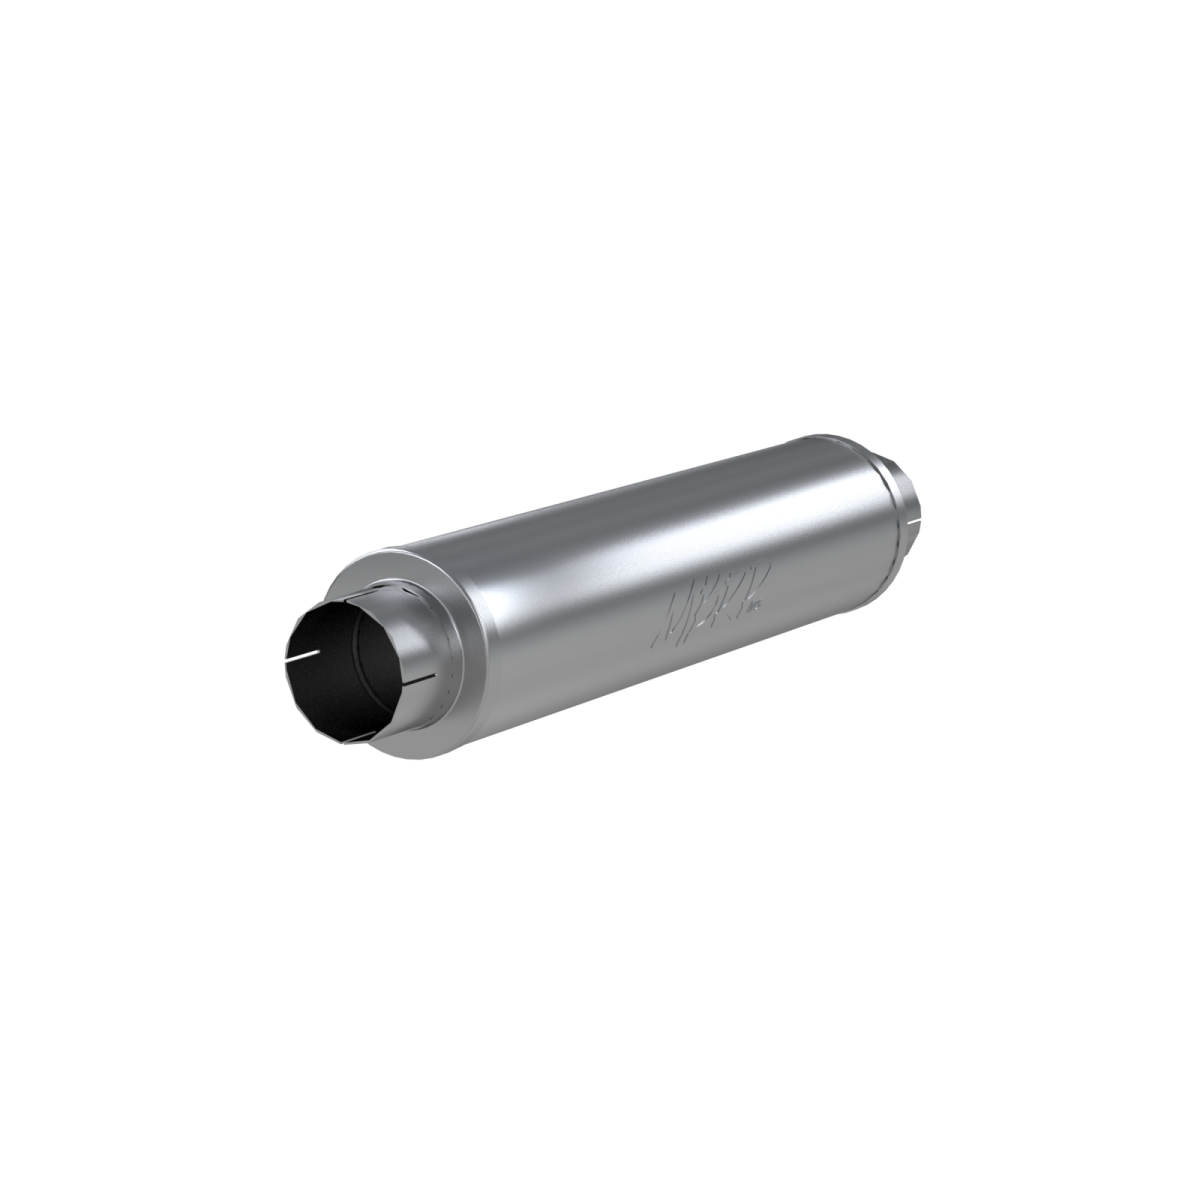 MBRP - MBRP 5872 Exhaust Muffler Replaces all 30 Inch Overall Length Mufflers M91031